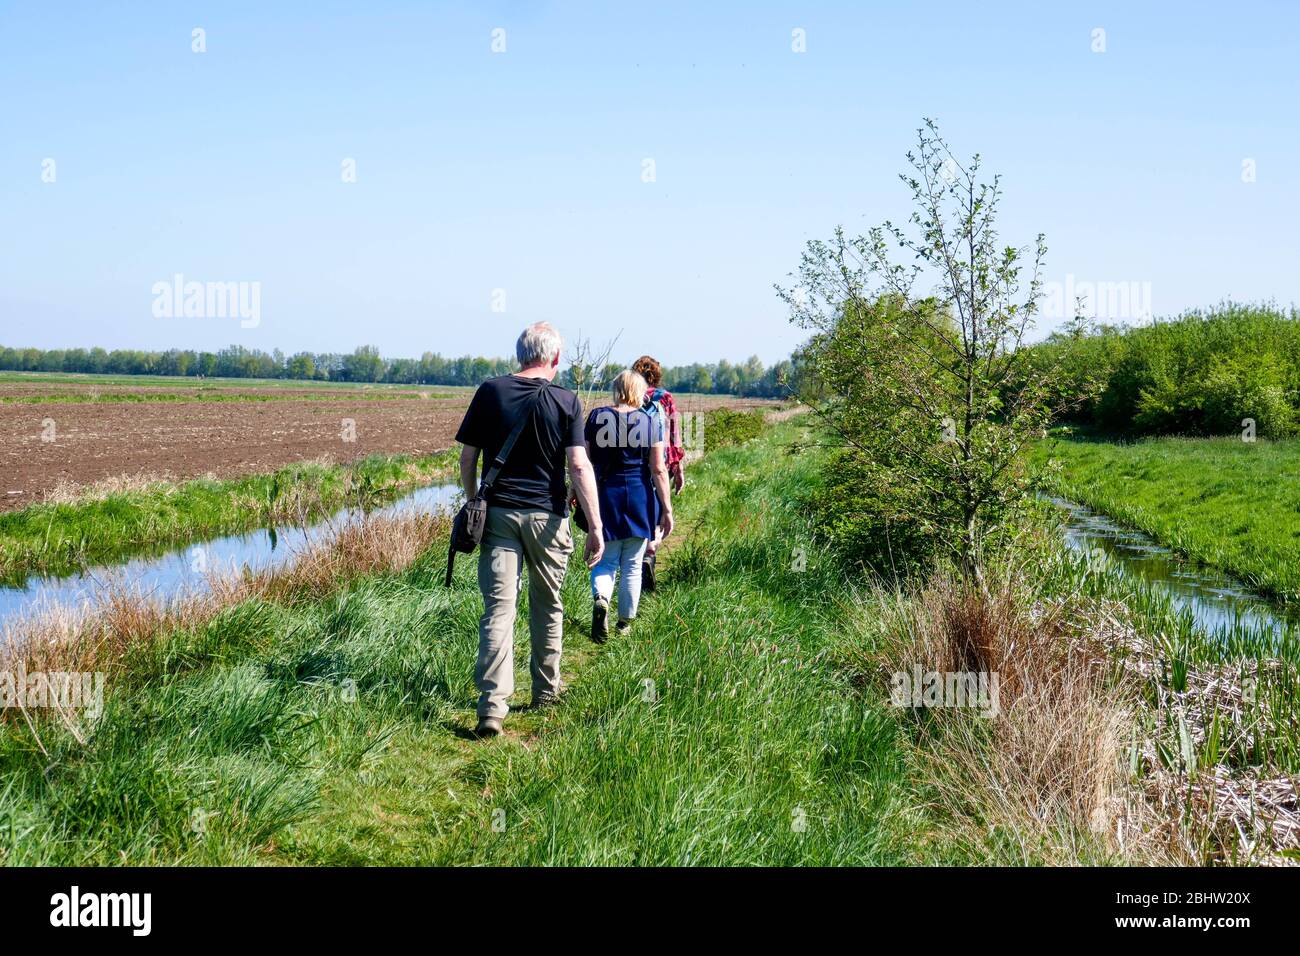 people walking on small path through rural area 'het groene hart' in west Holland Stock Photo